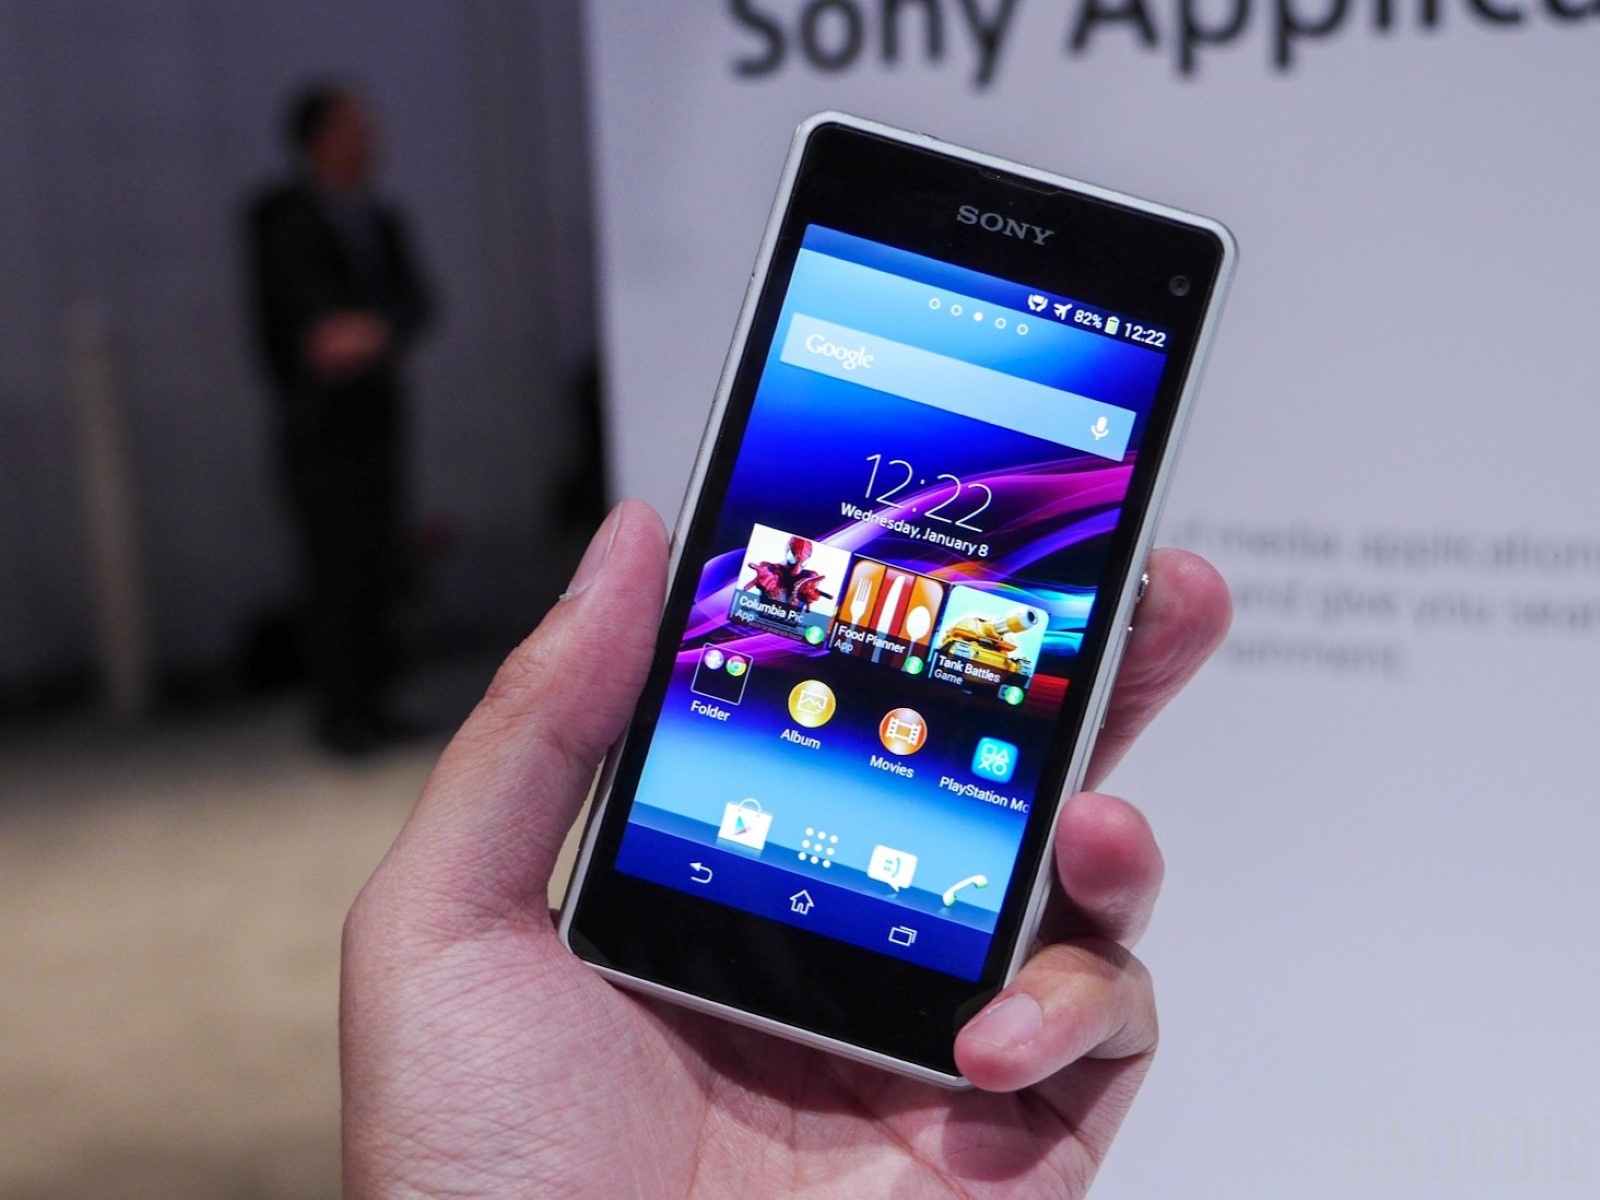 Enhancing Connectivity: Enabling LTE On Sony Xperia Z